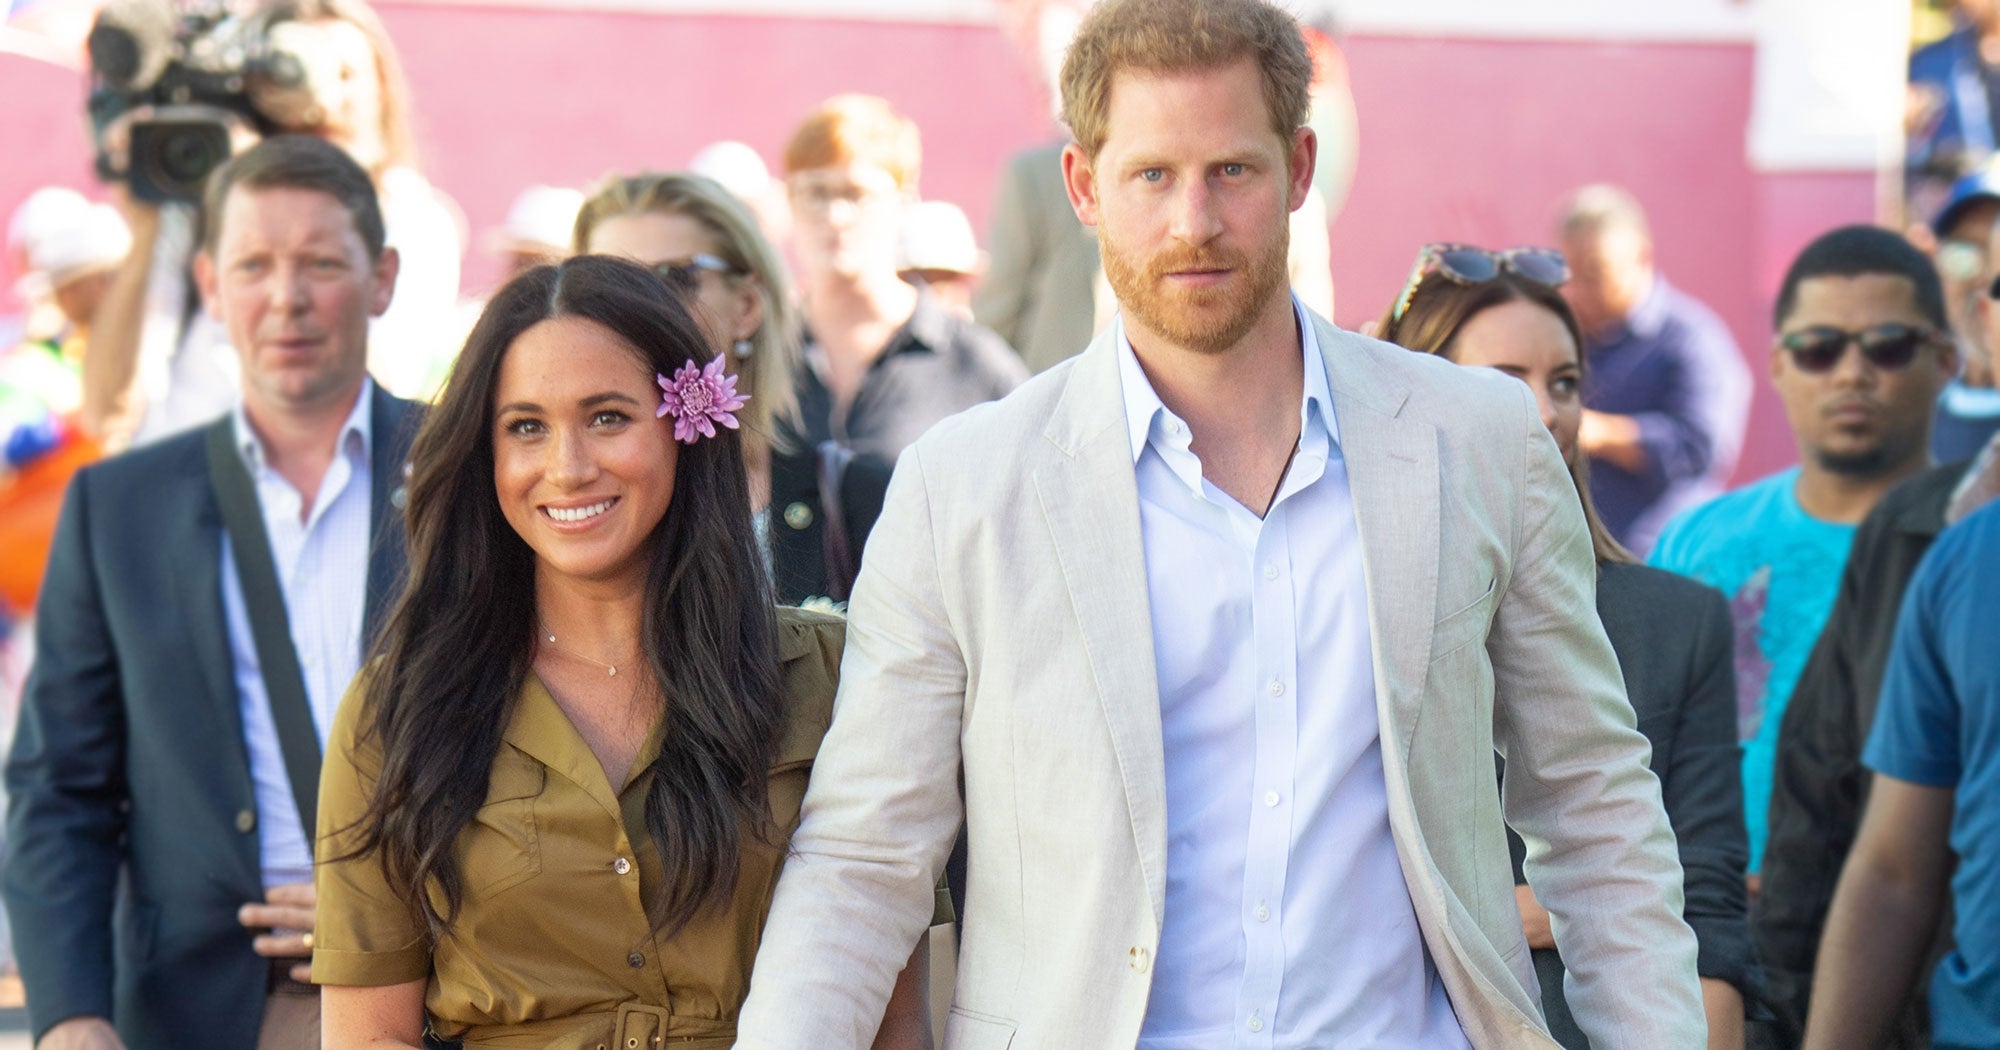 Prince Harry And Meghan Markle Leave HRH Titles